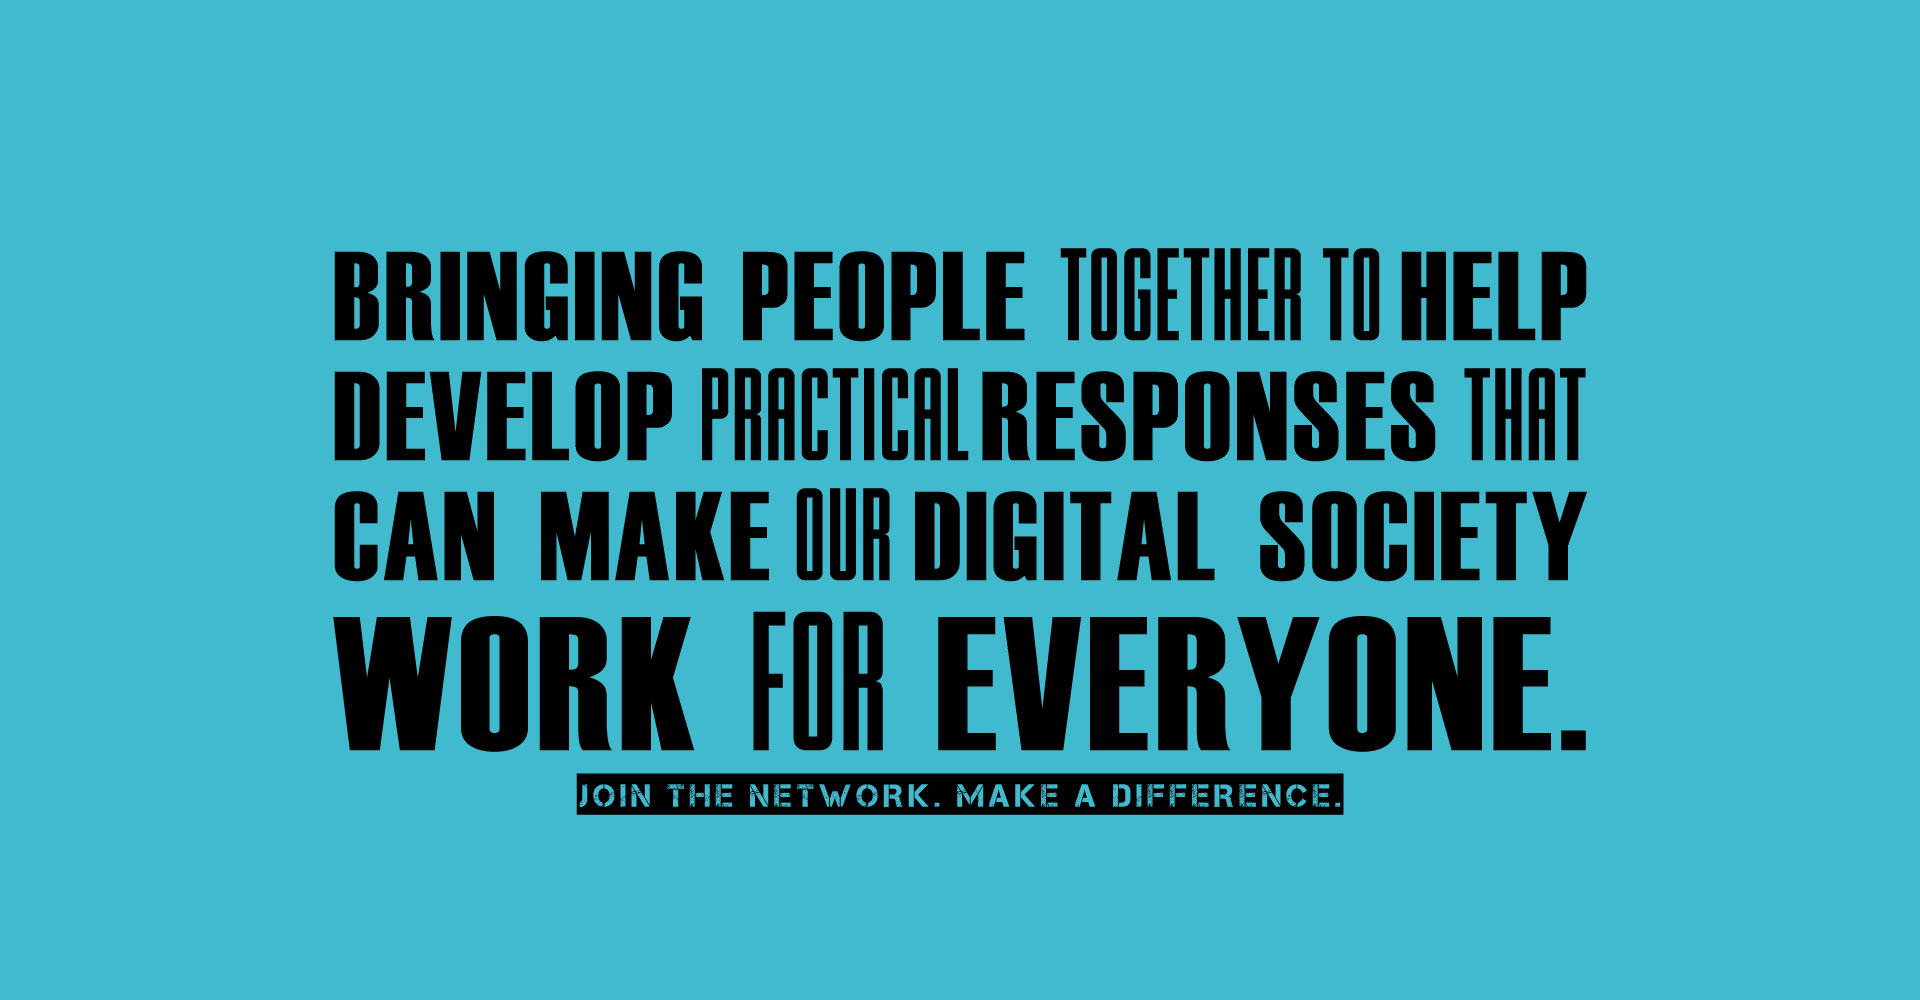 Bringing people together to help develop practical responses that can make our digital society work for everyone. Join the Network. Make a difference.